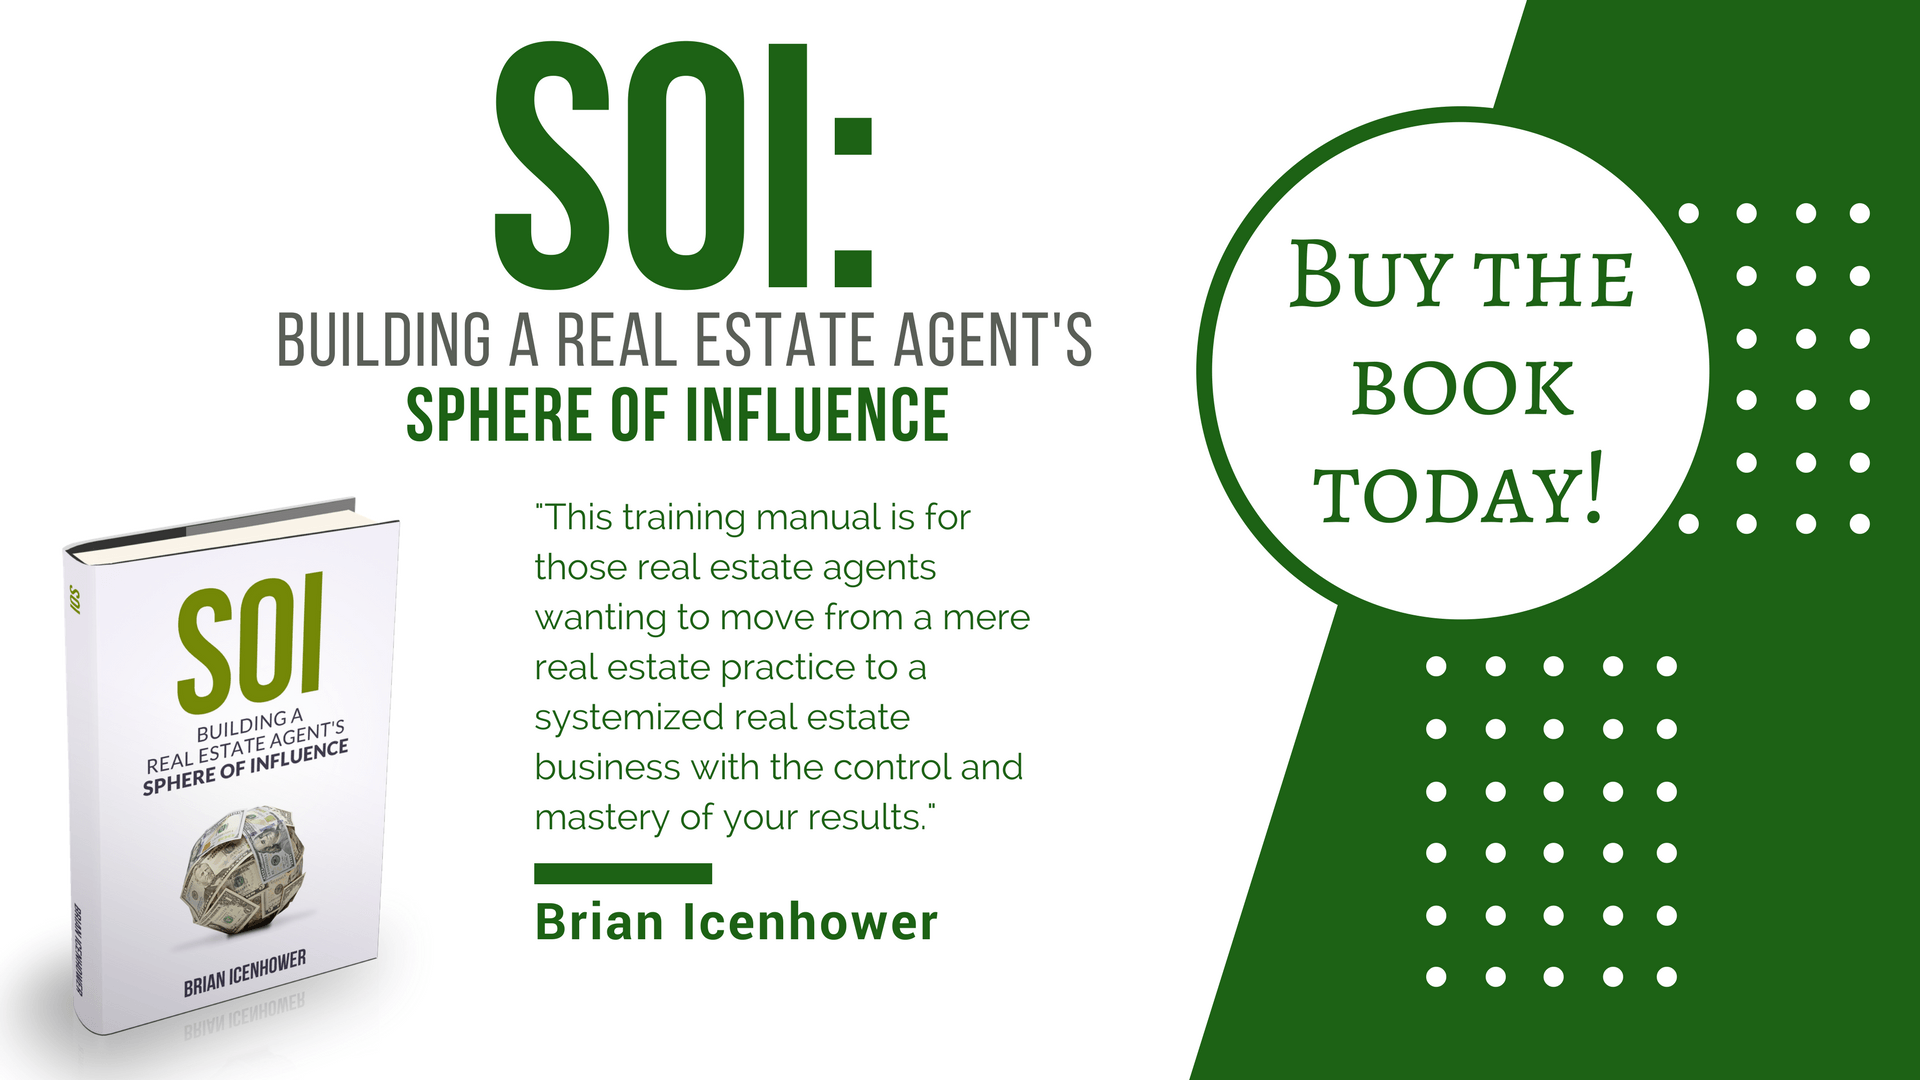 SOI: Building A Real Estate Agent’s Sphere of Influence